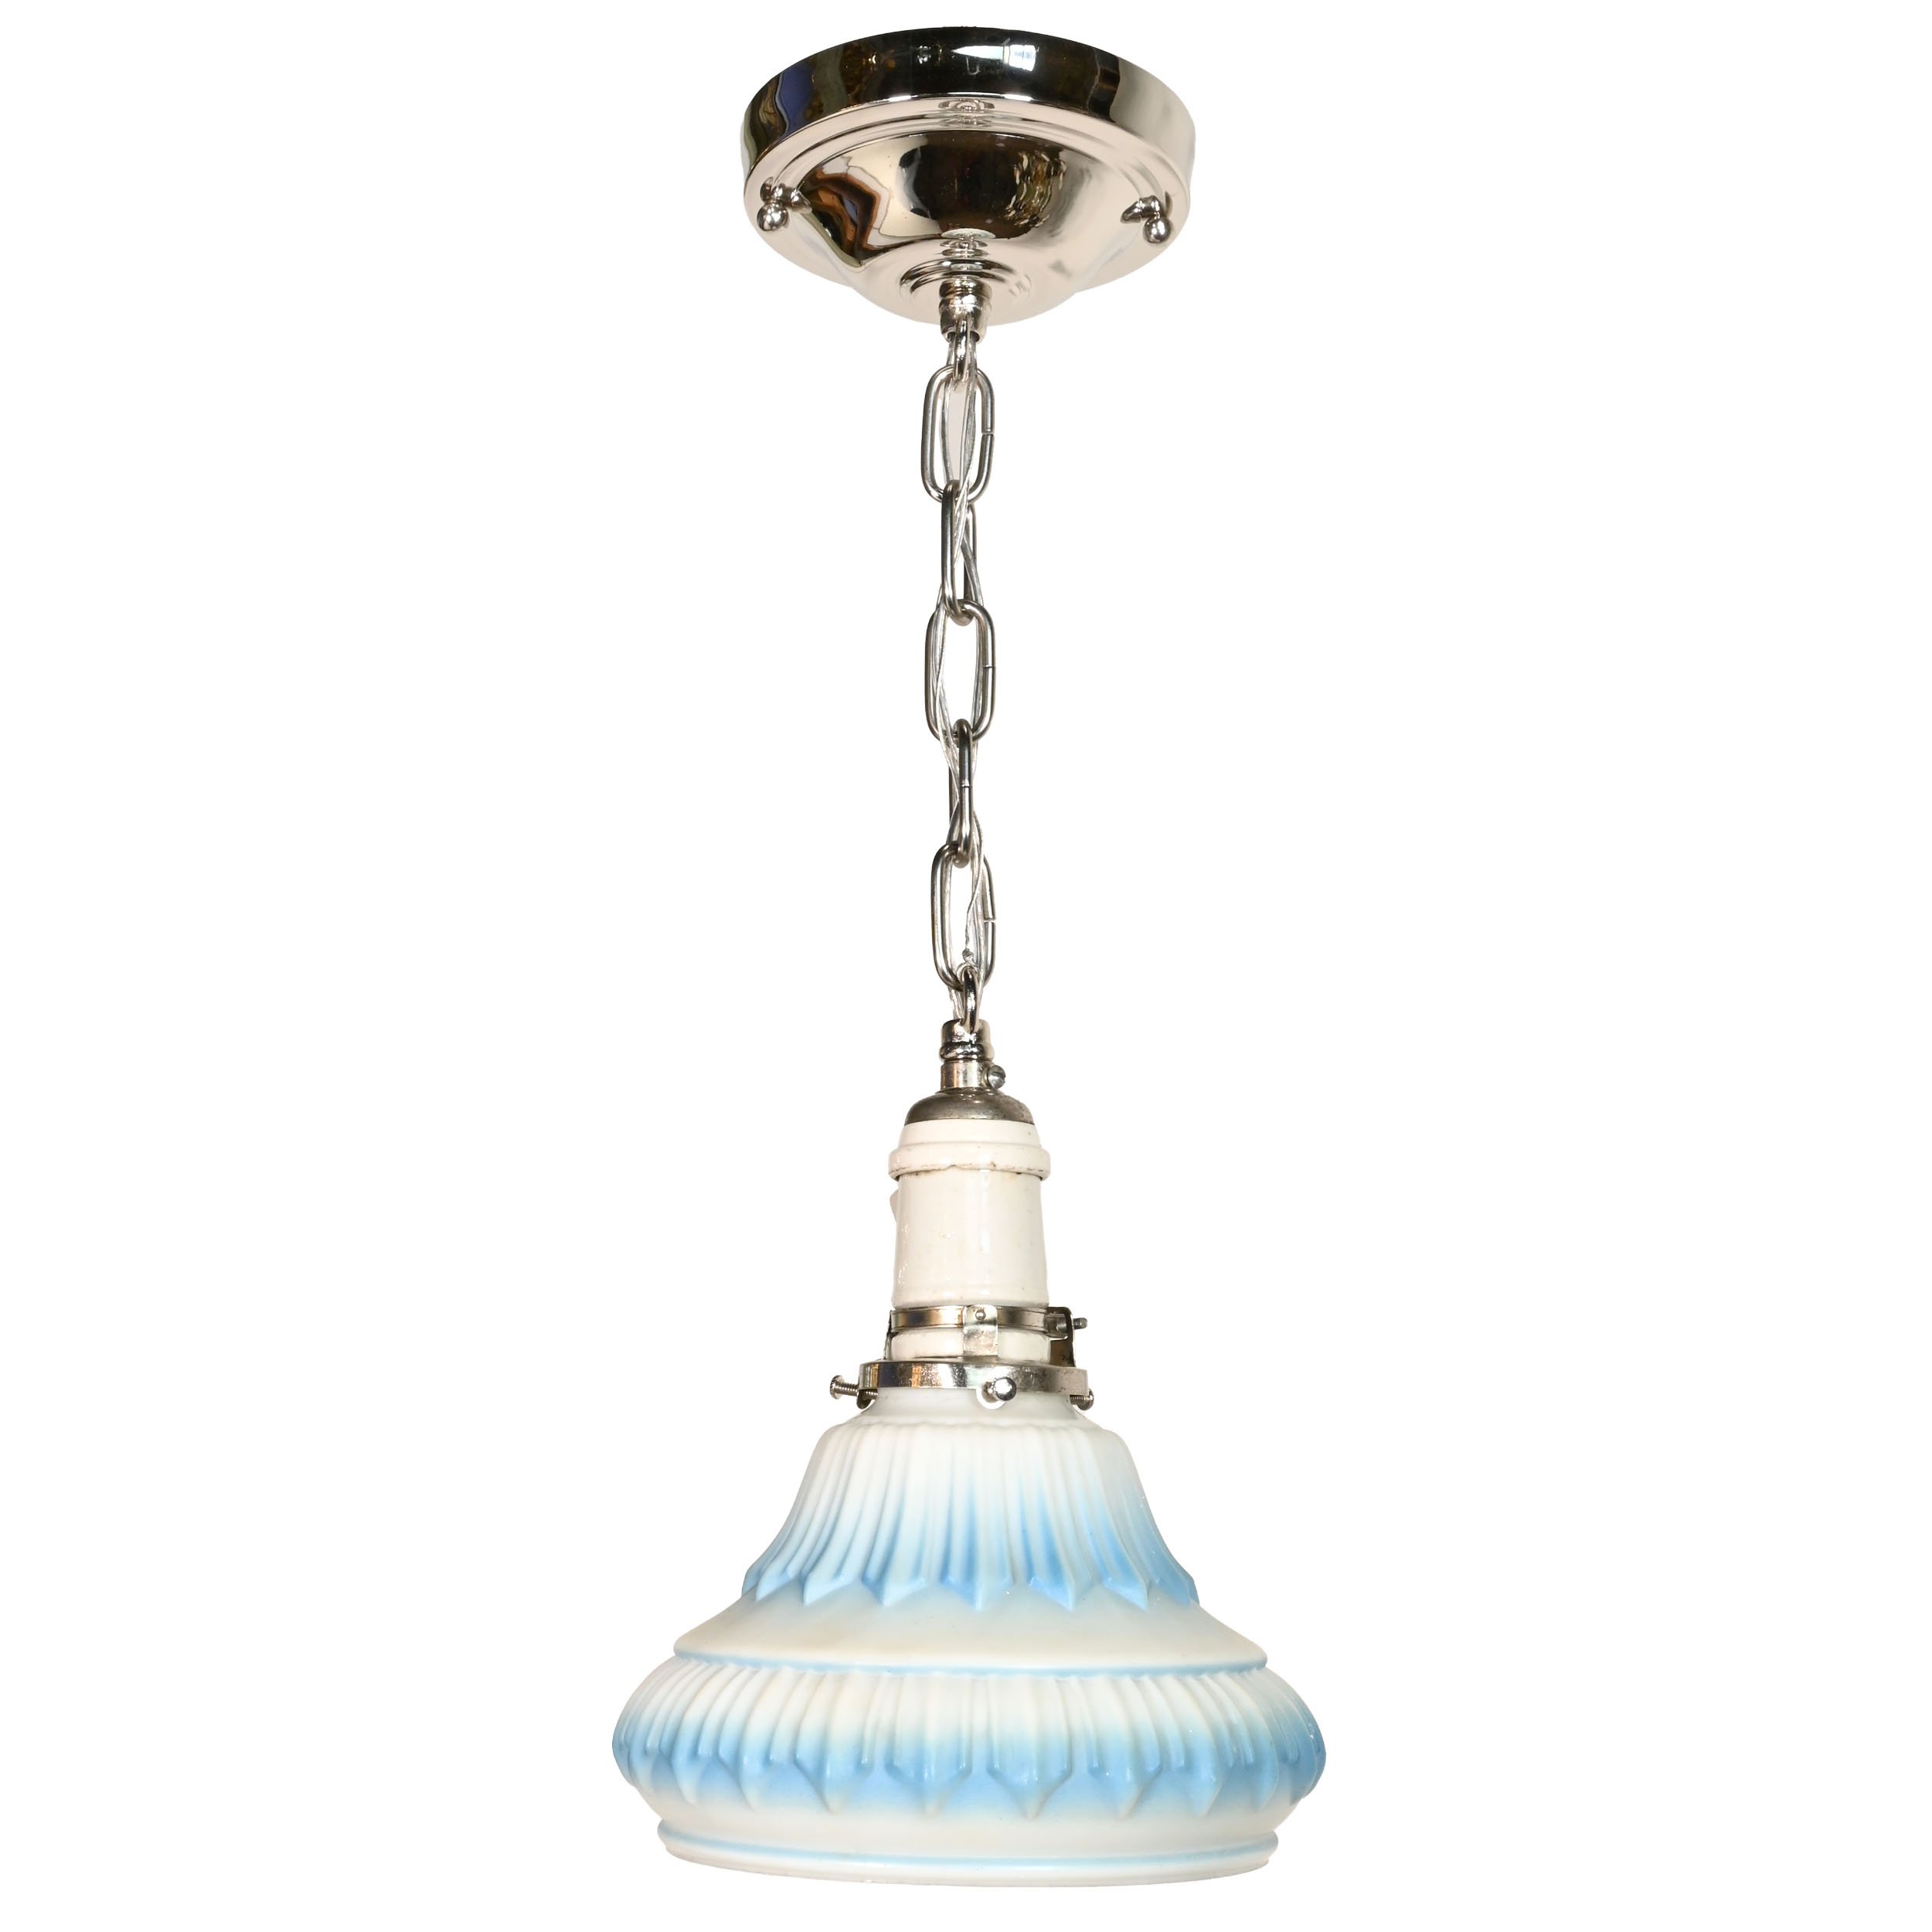 blue and white deco shade on nickel pendant with antique porcelain socket